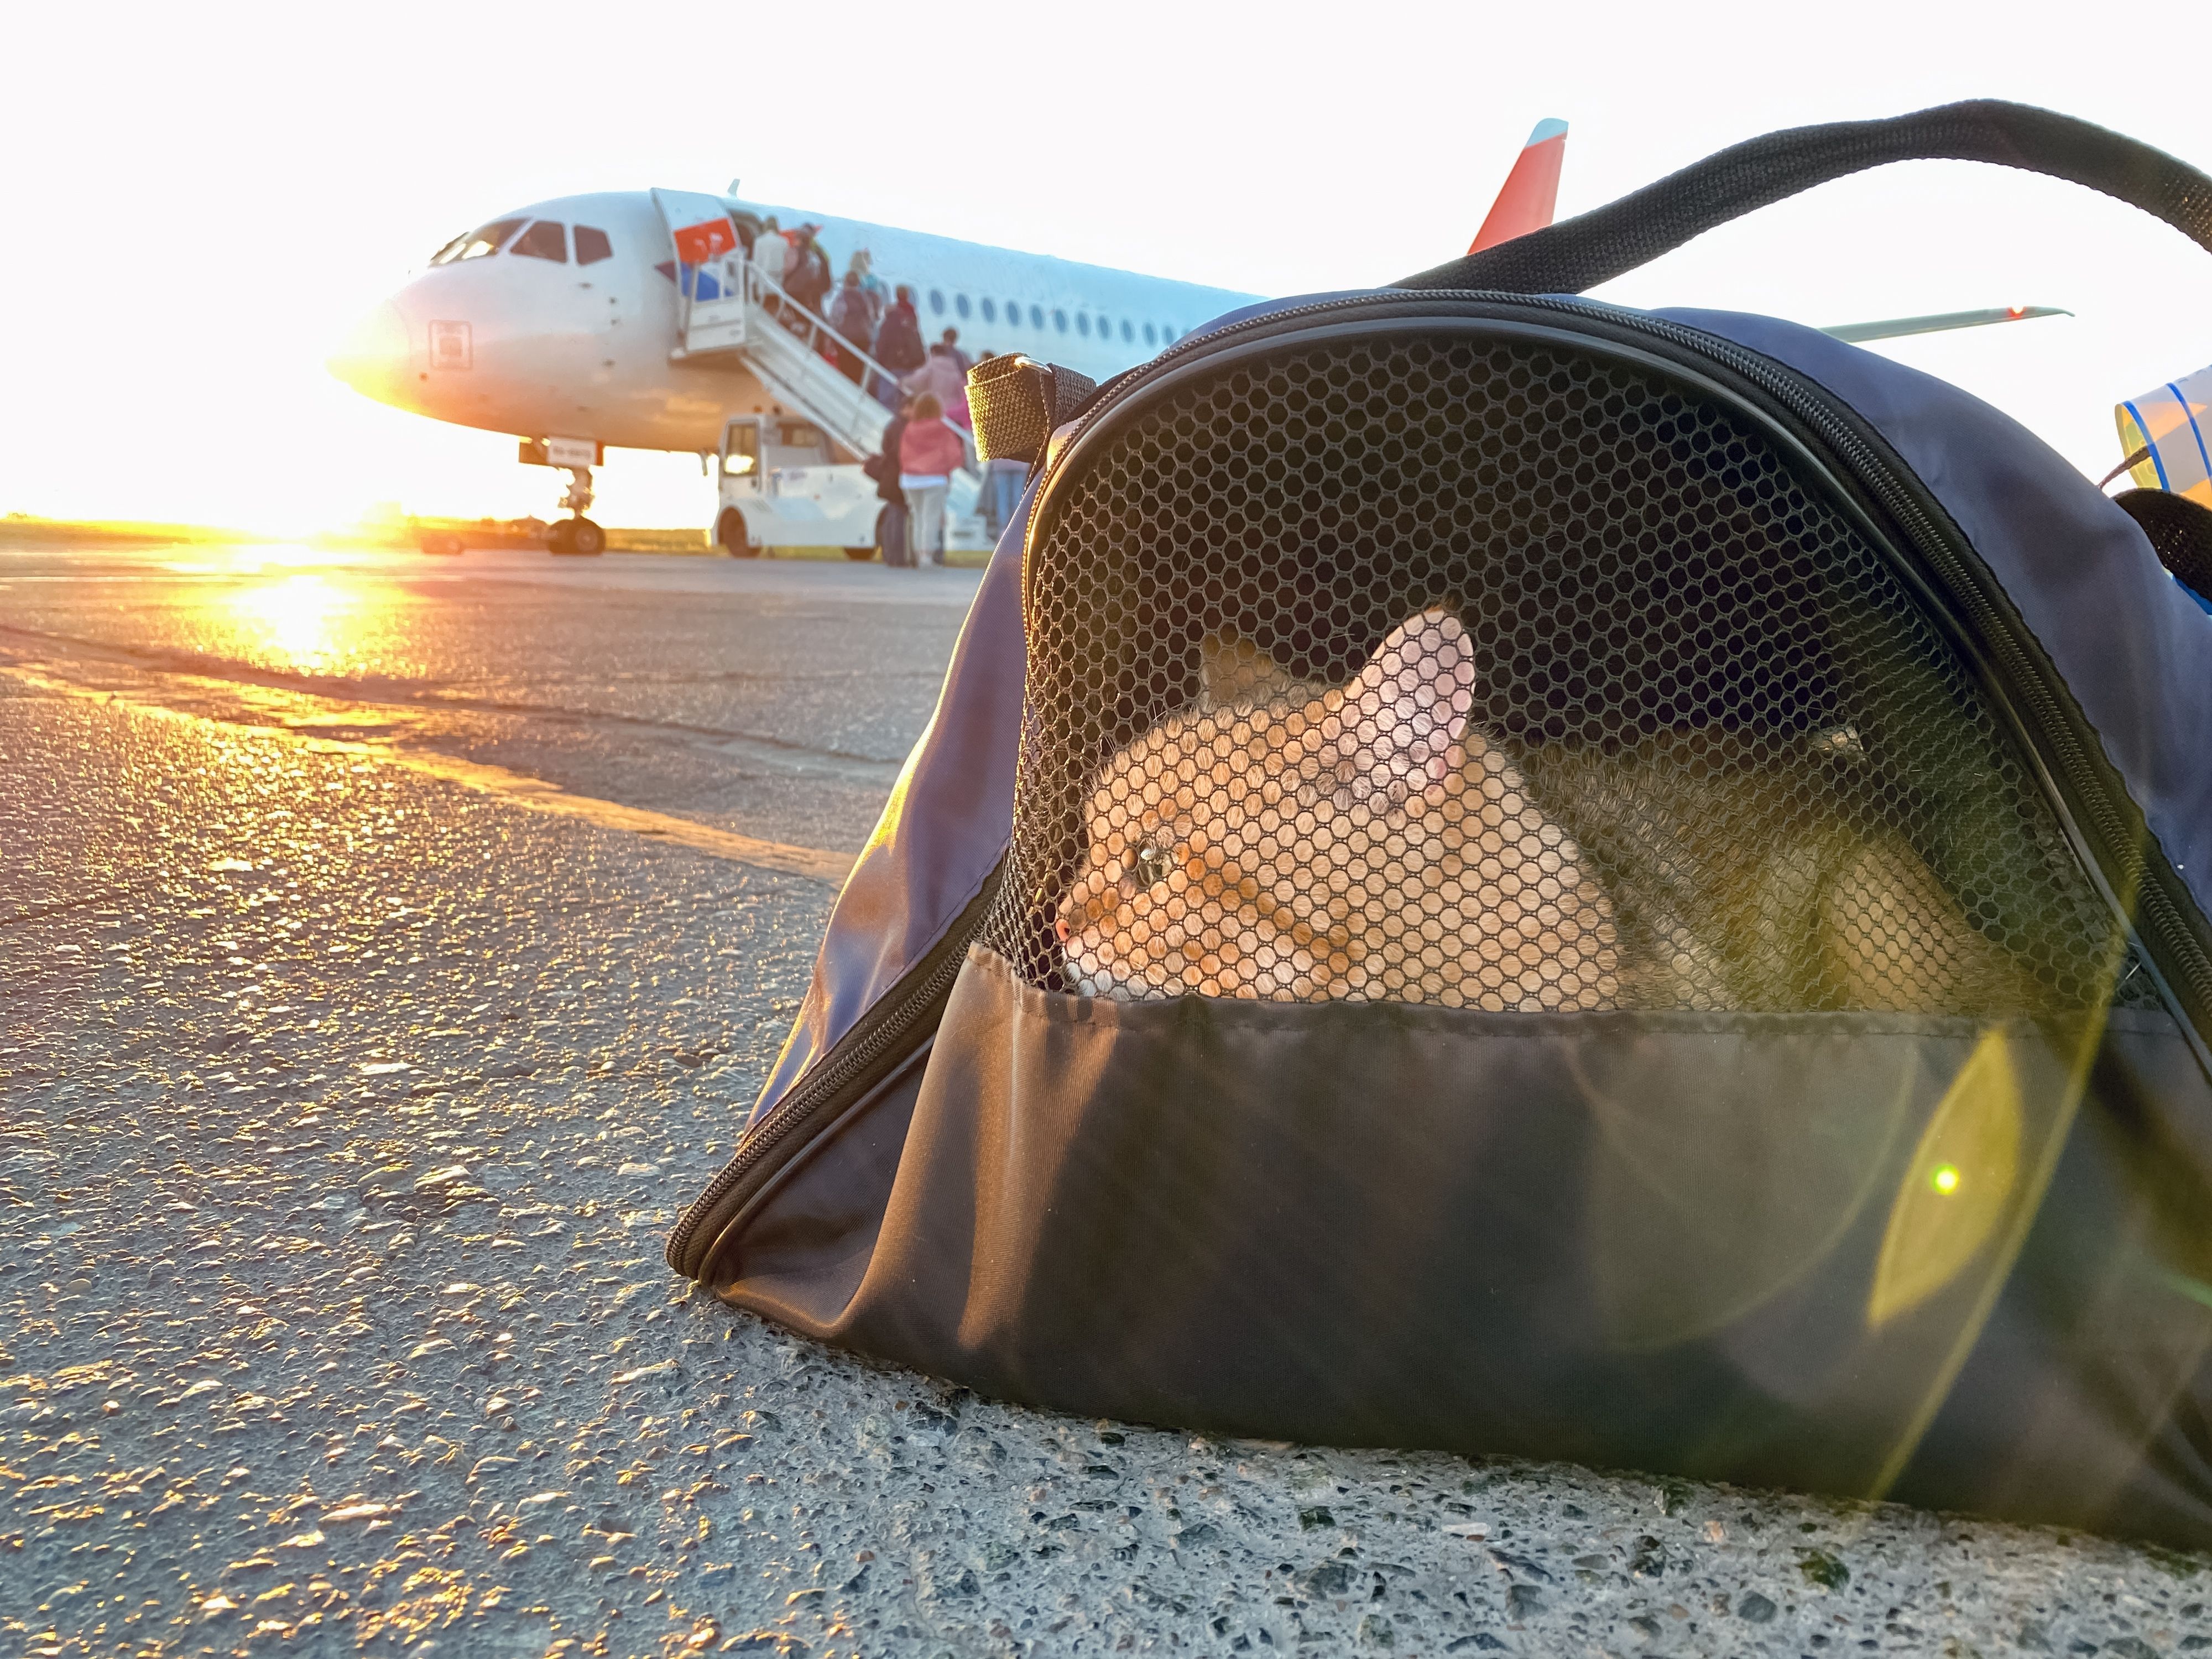 A cat sitting in a bag near a parked aircraft at an airport.